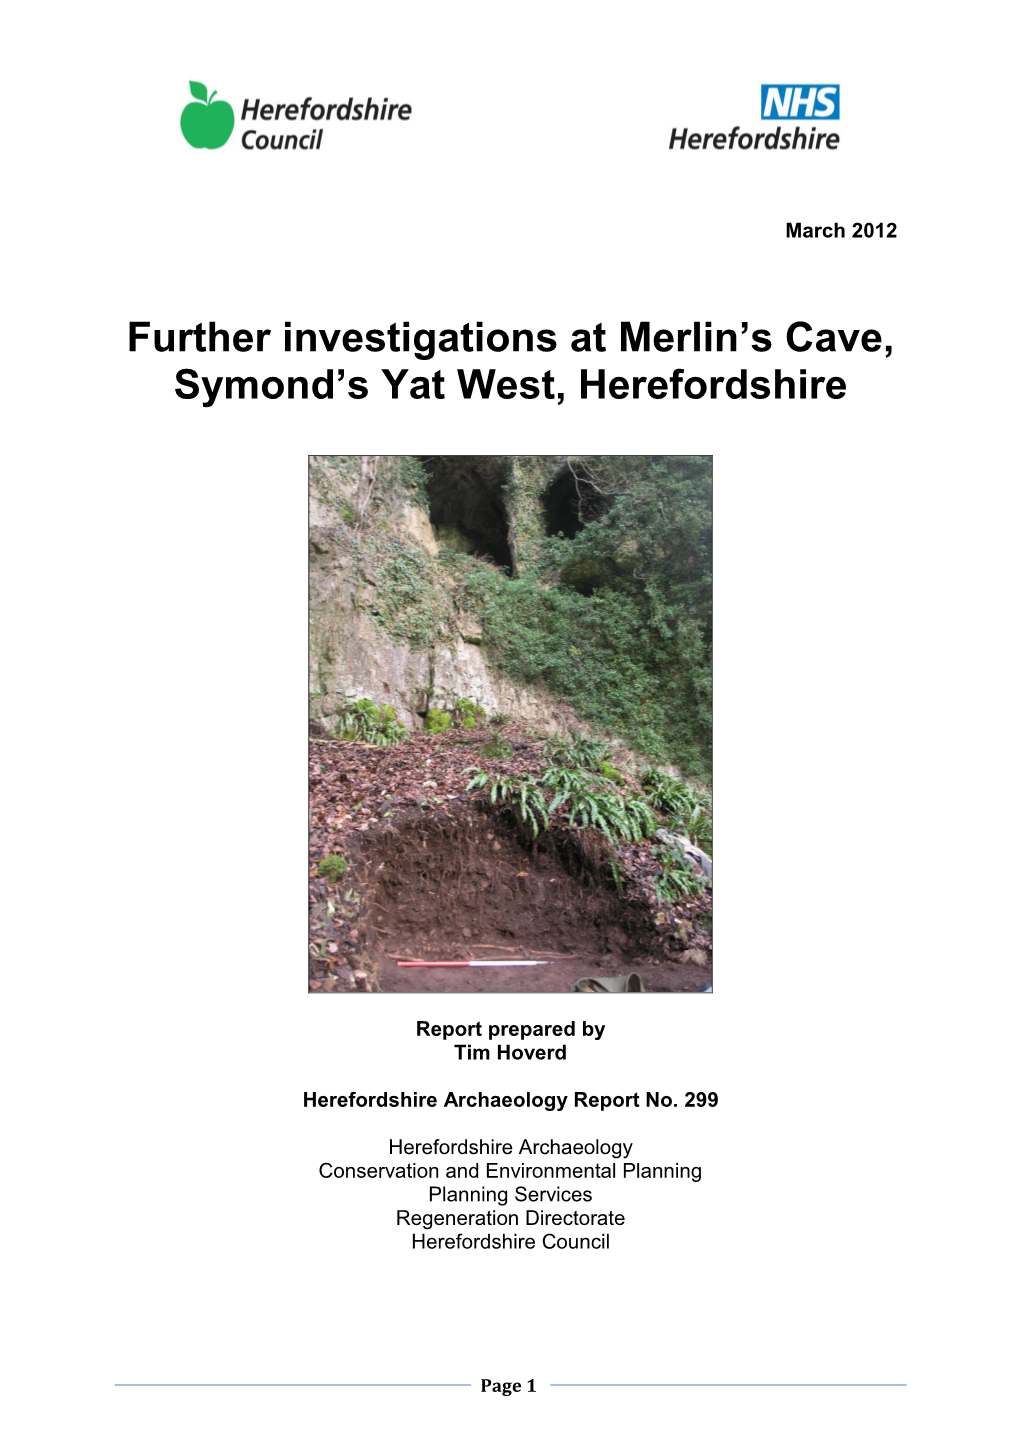 Radiocarbon Report for Merlins Cave, Symonds Yat (74570.5) by Chris J